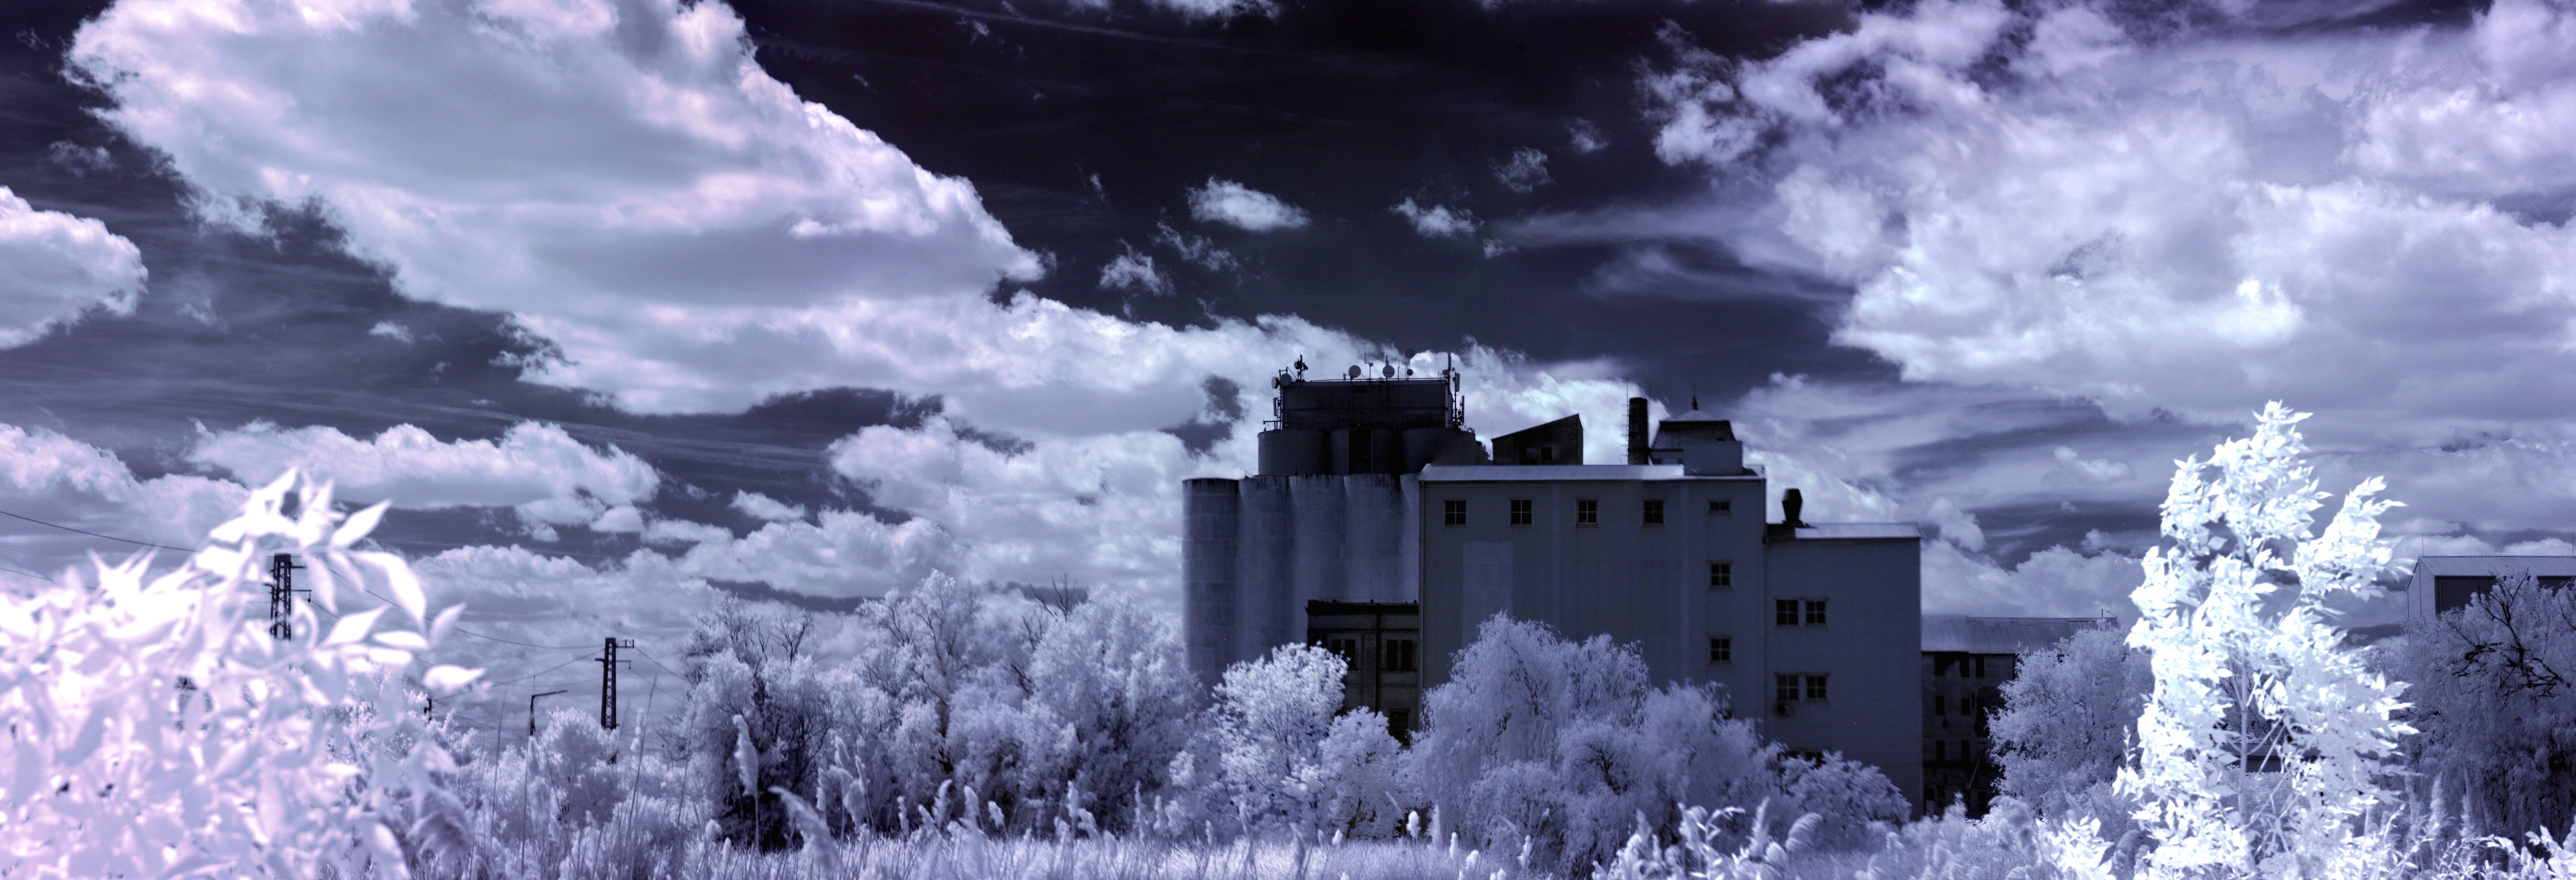 Infrared Building Nature Trees Clouds 6326x2162